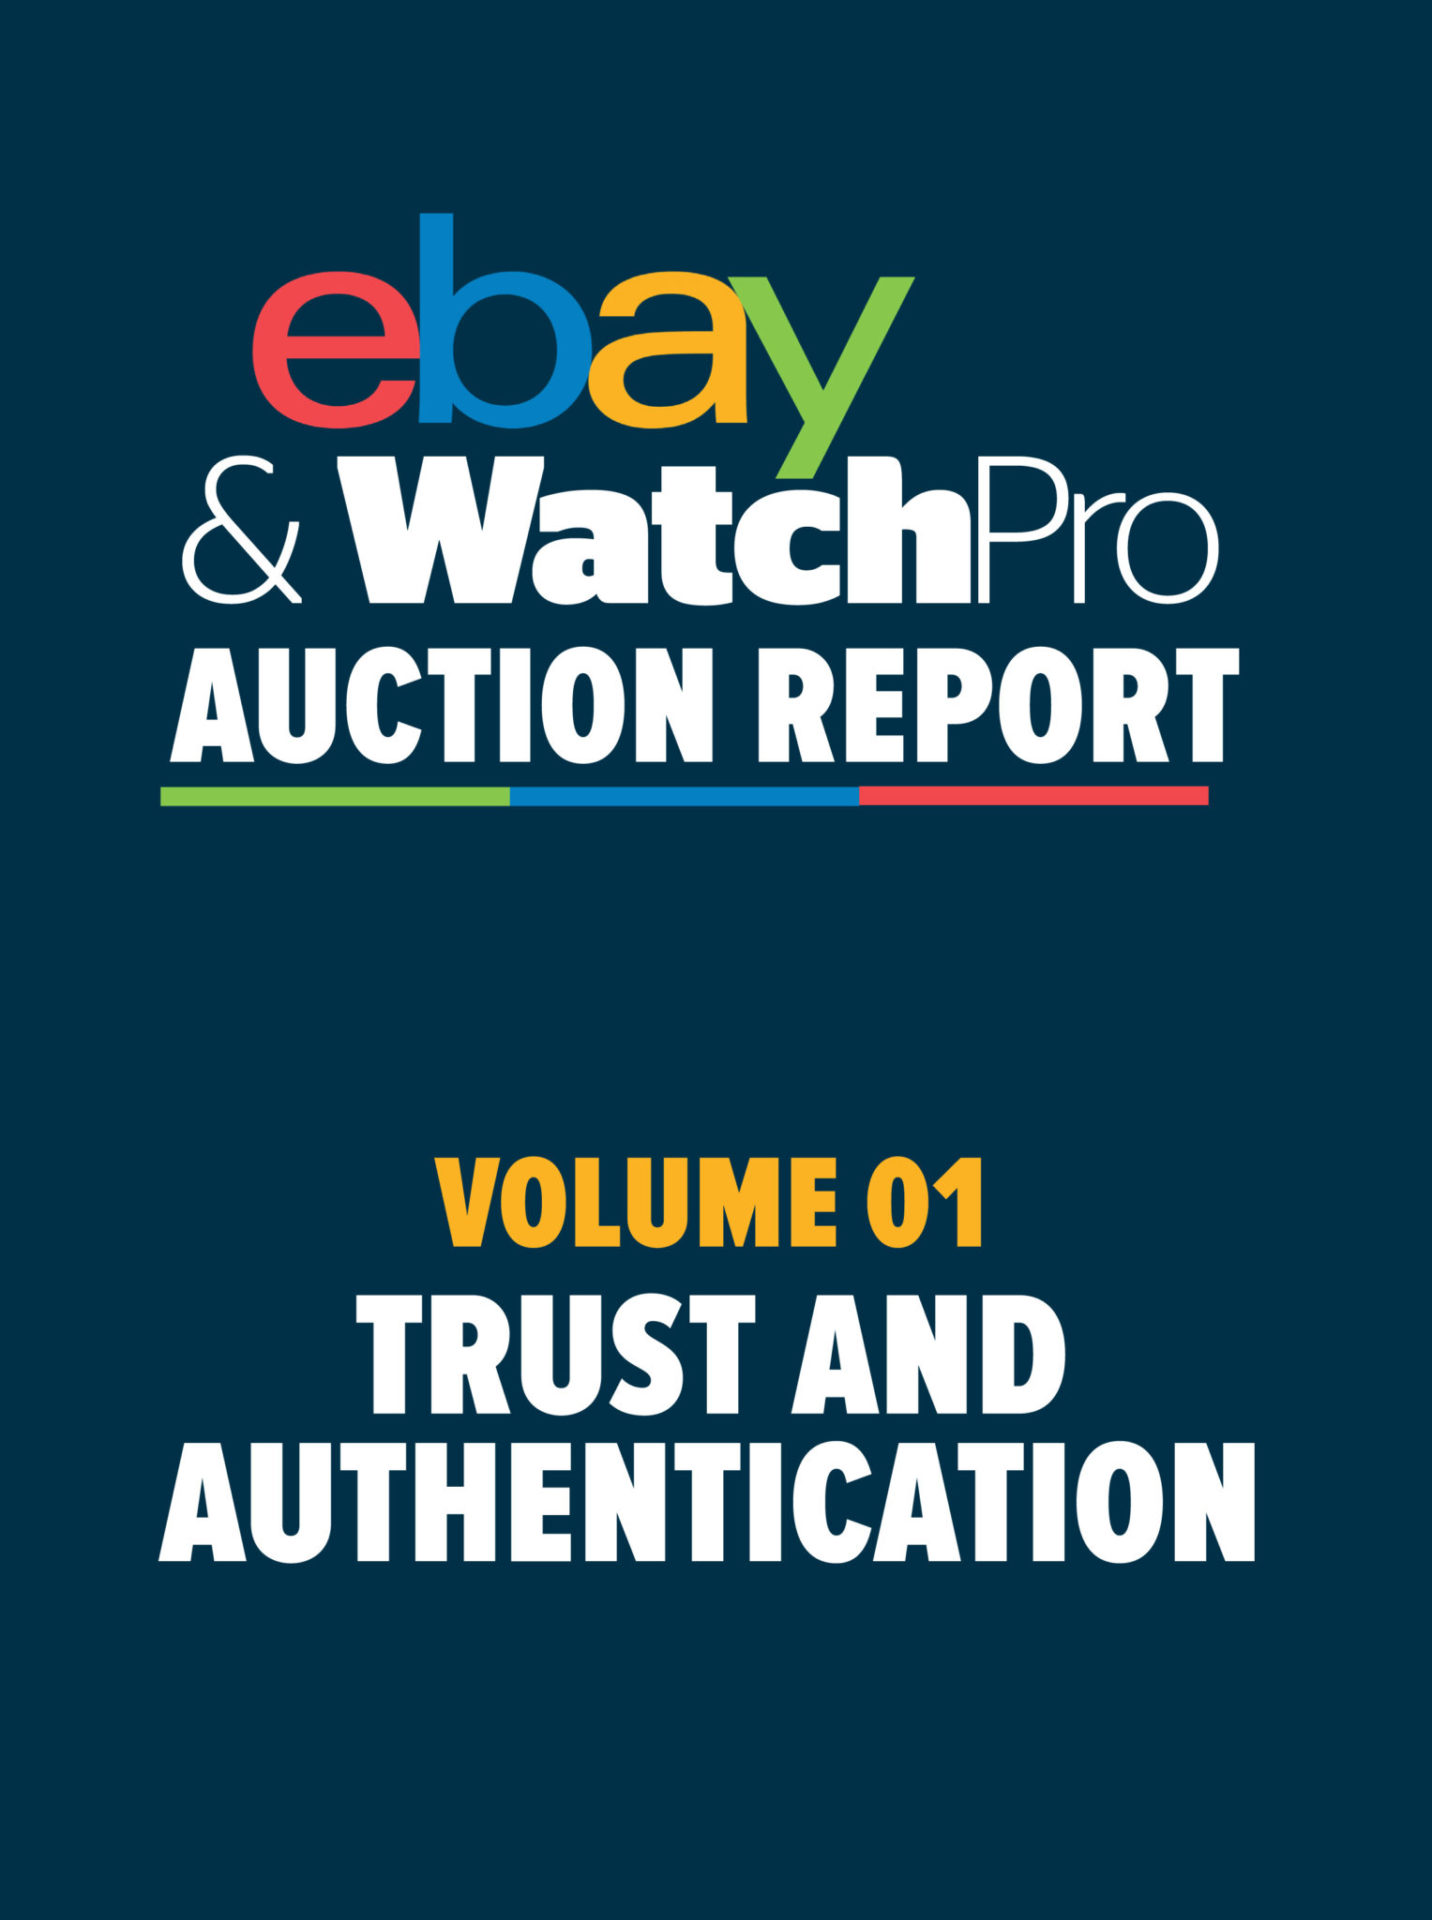 Ebay auction special report volume 1 1